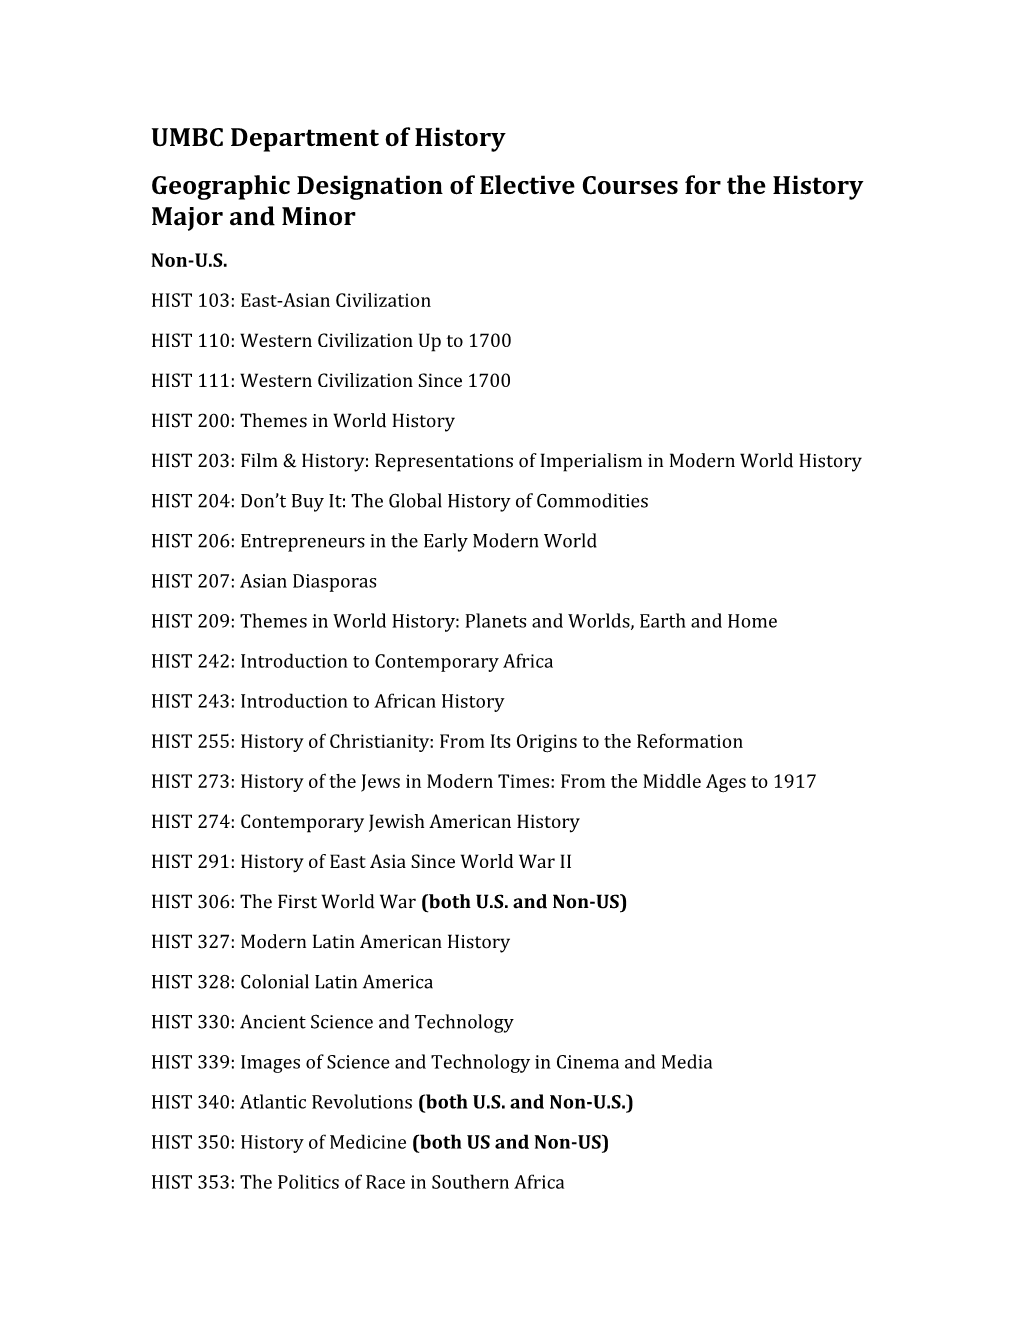 Geographic Designation of Elective Courses for the History Major and Minor